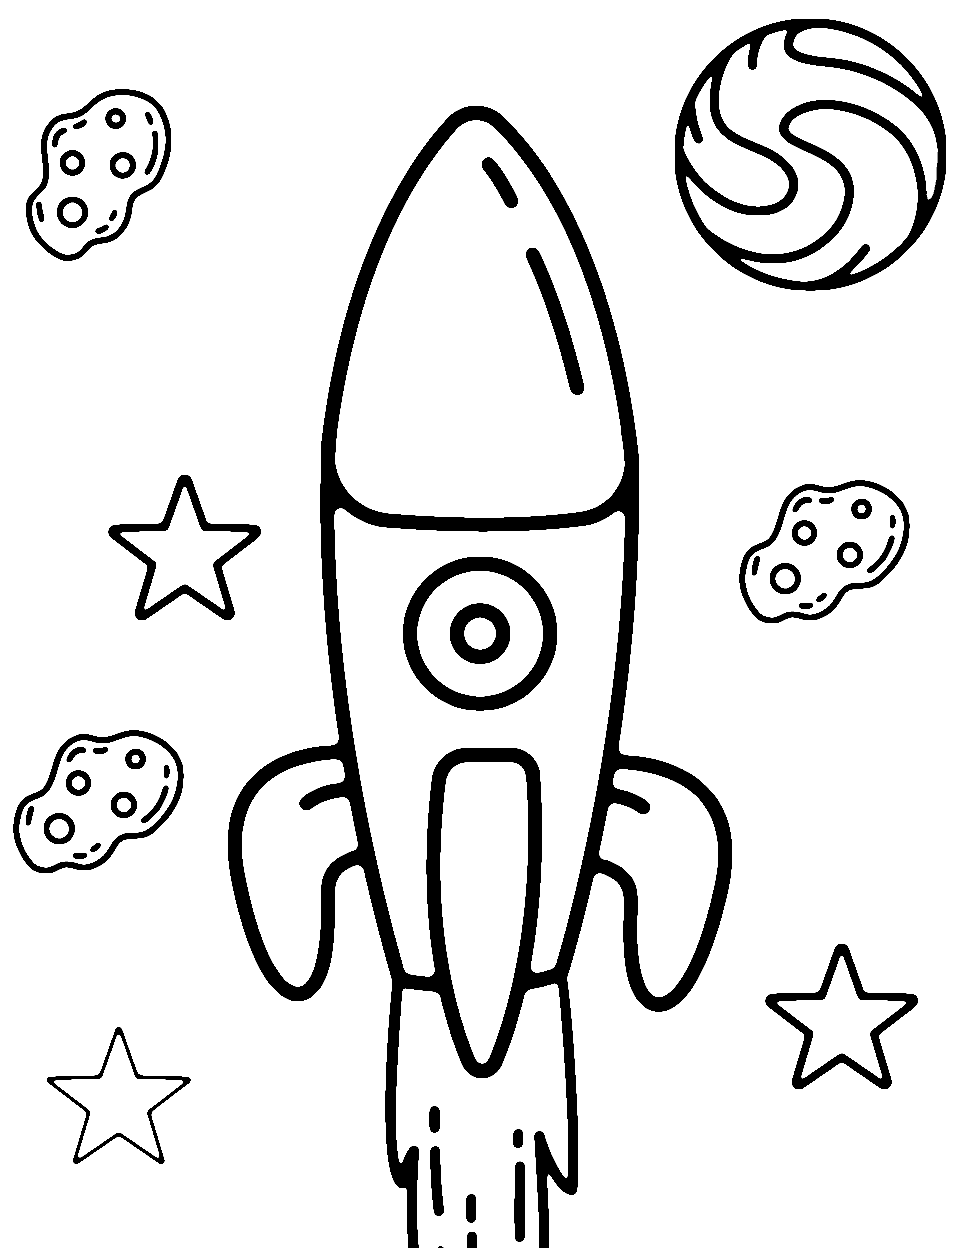 Toddler's First Spaceship Coloring Page - A simple spaceship design with bright colors, perfect for a toddler’s imagination.